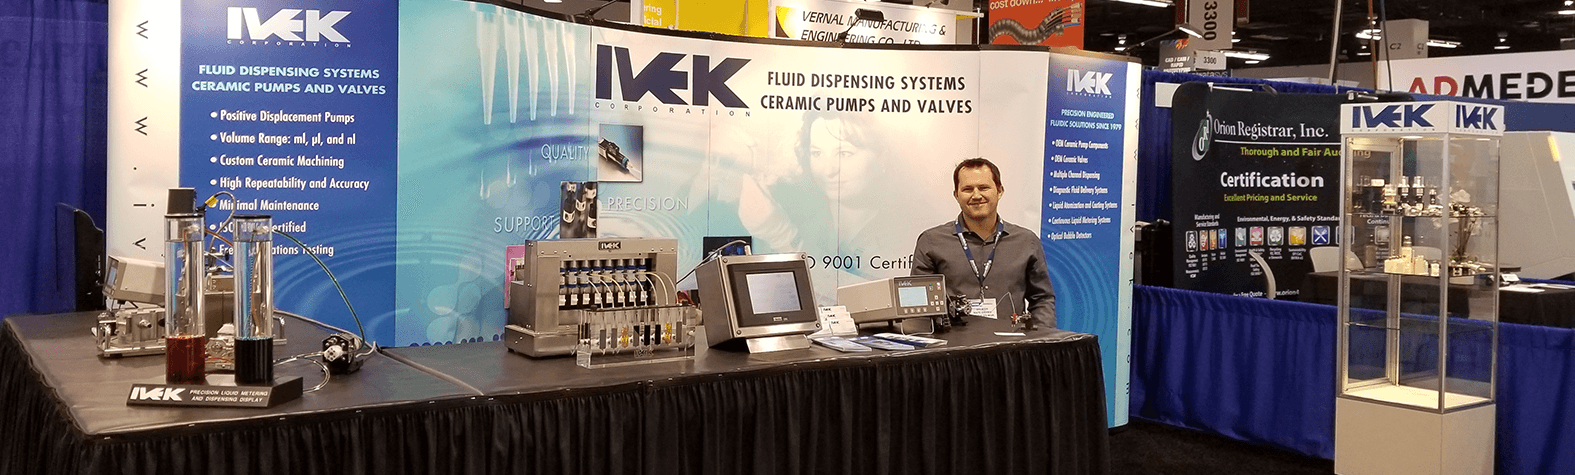 IVEK-trade-show-booth-attendance